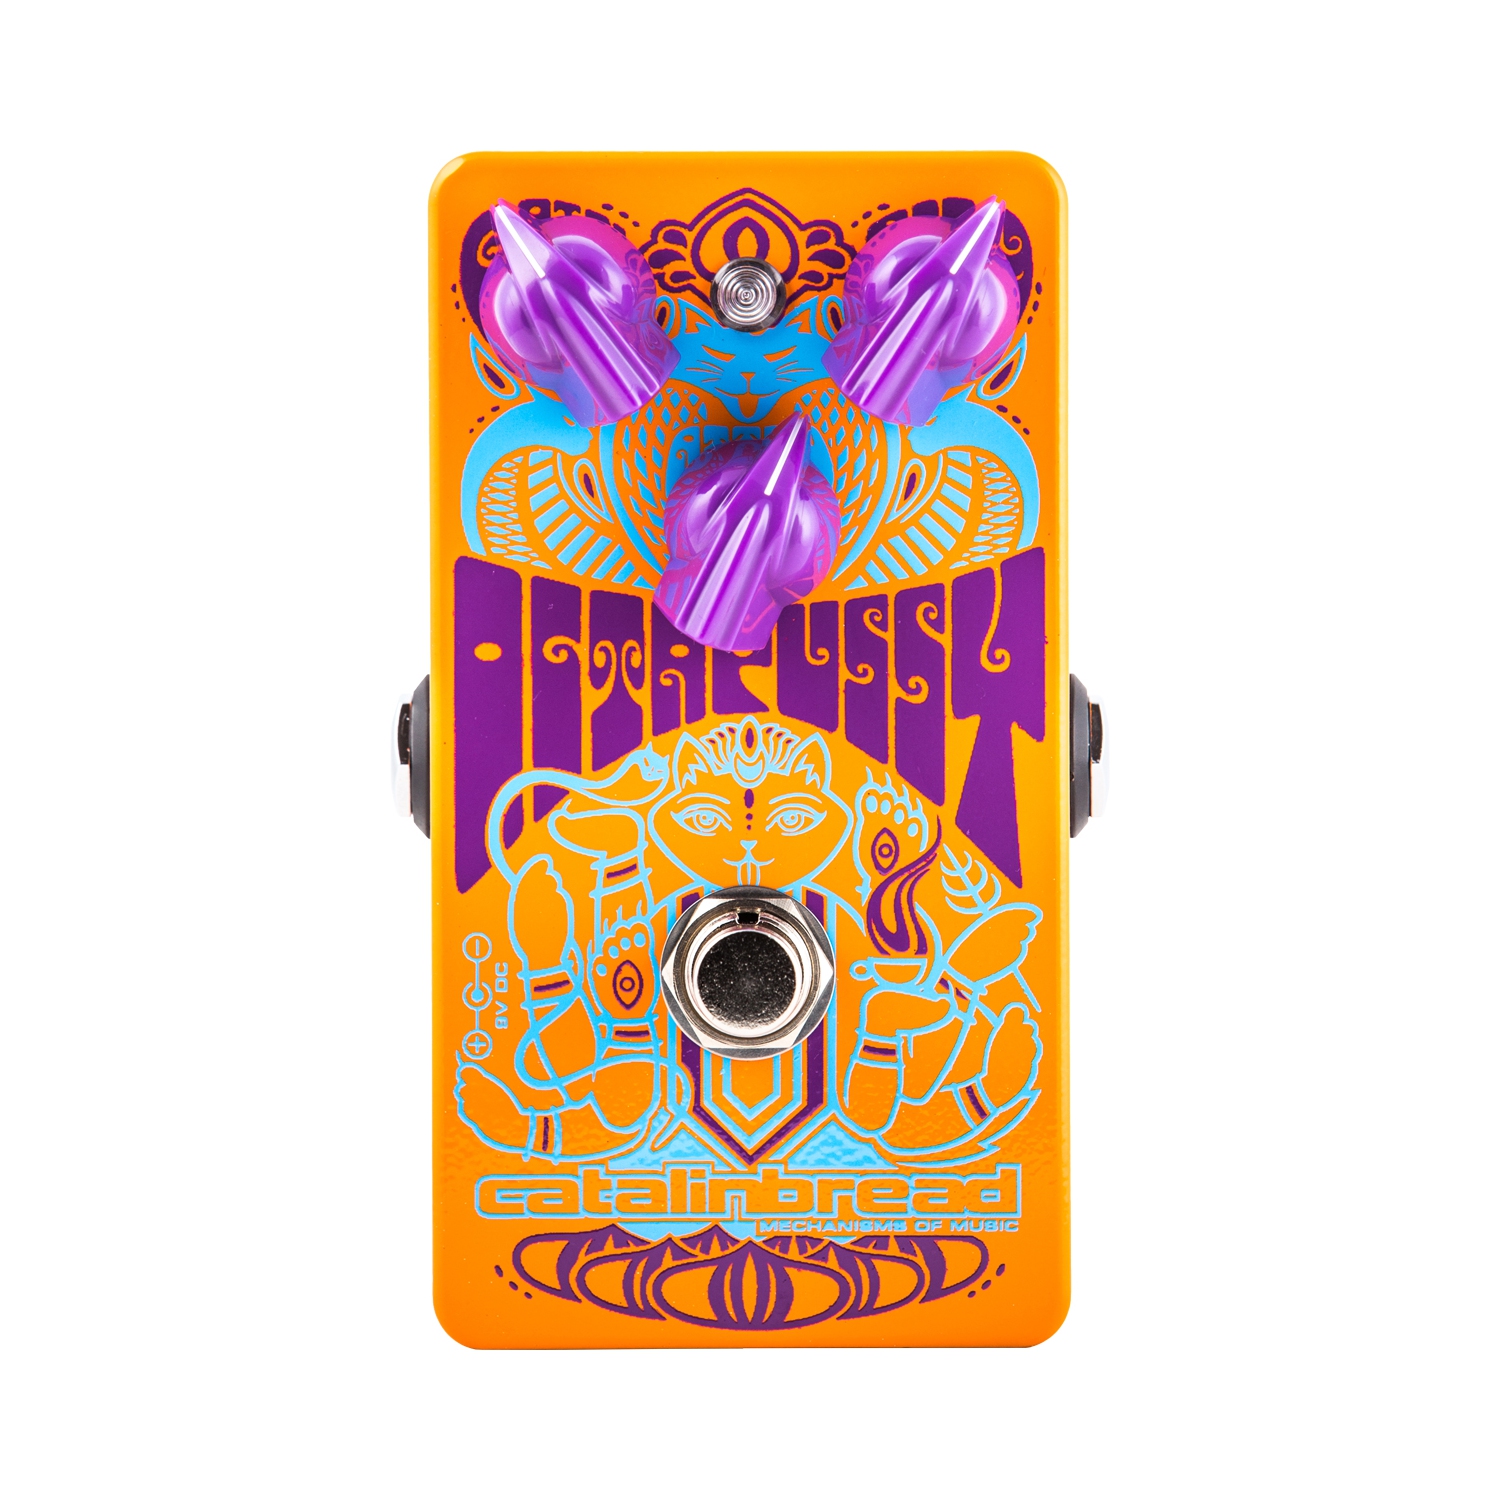 Modern　Buy　Best　Catalinbread　Pedal　Effects　Guitar　Octapussy　Fuzz　Octave　Canada